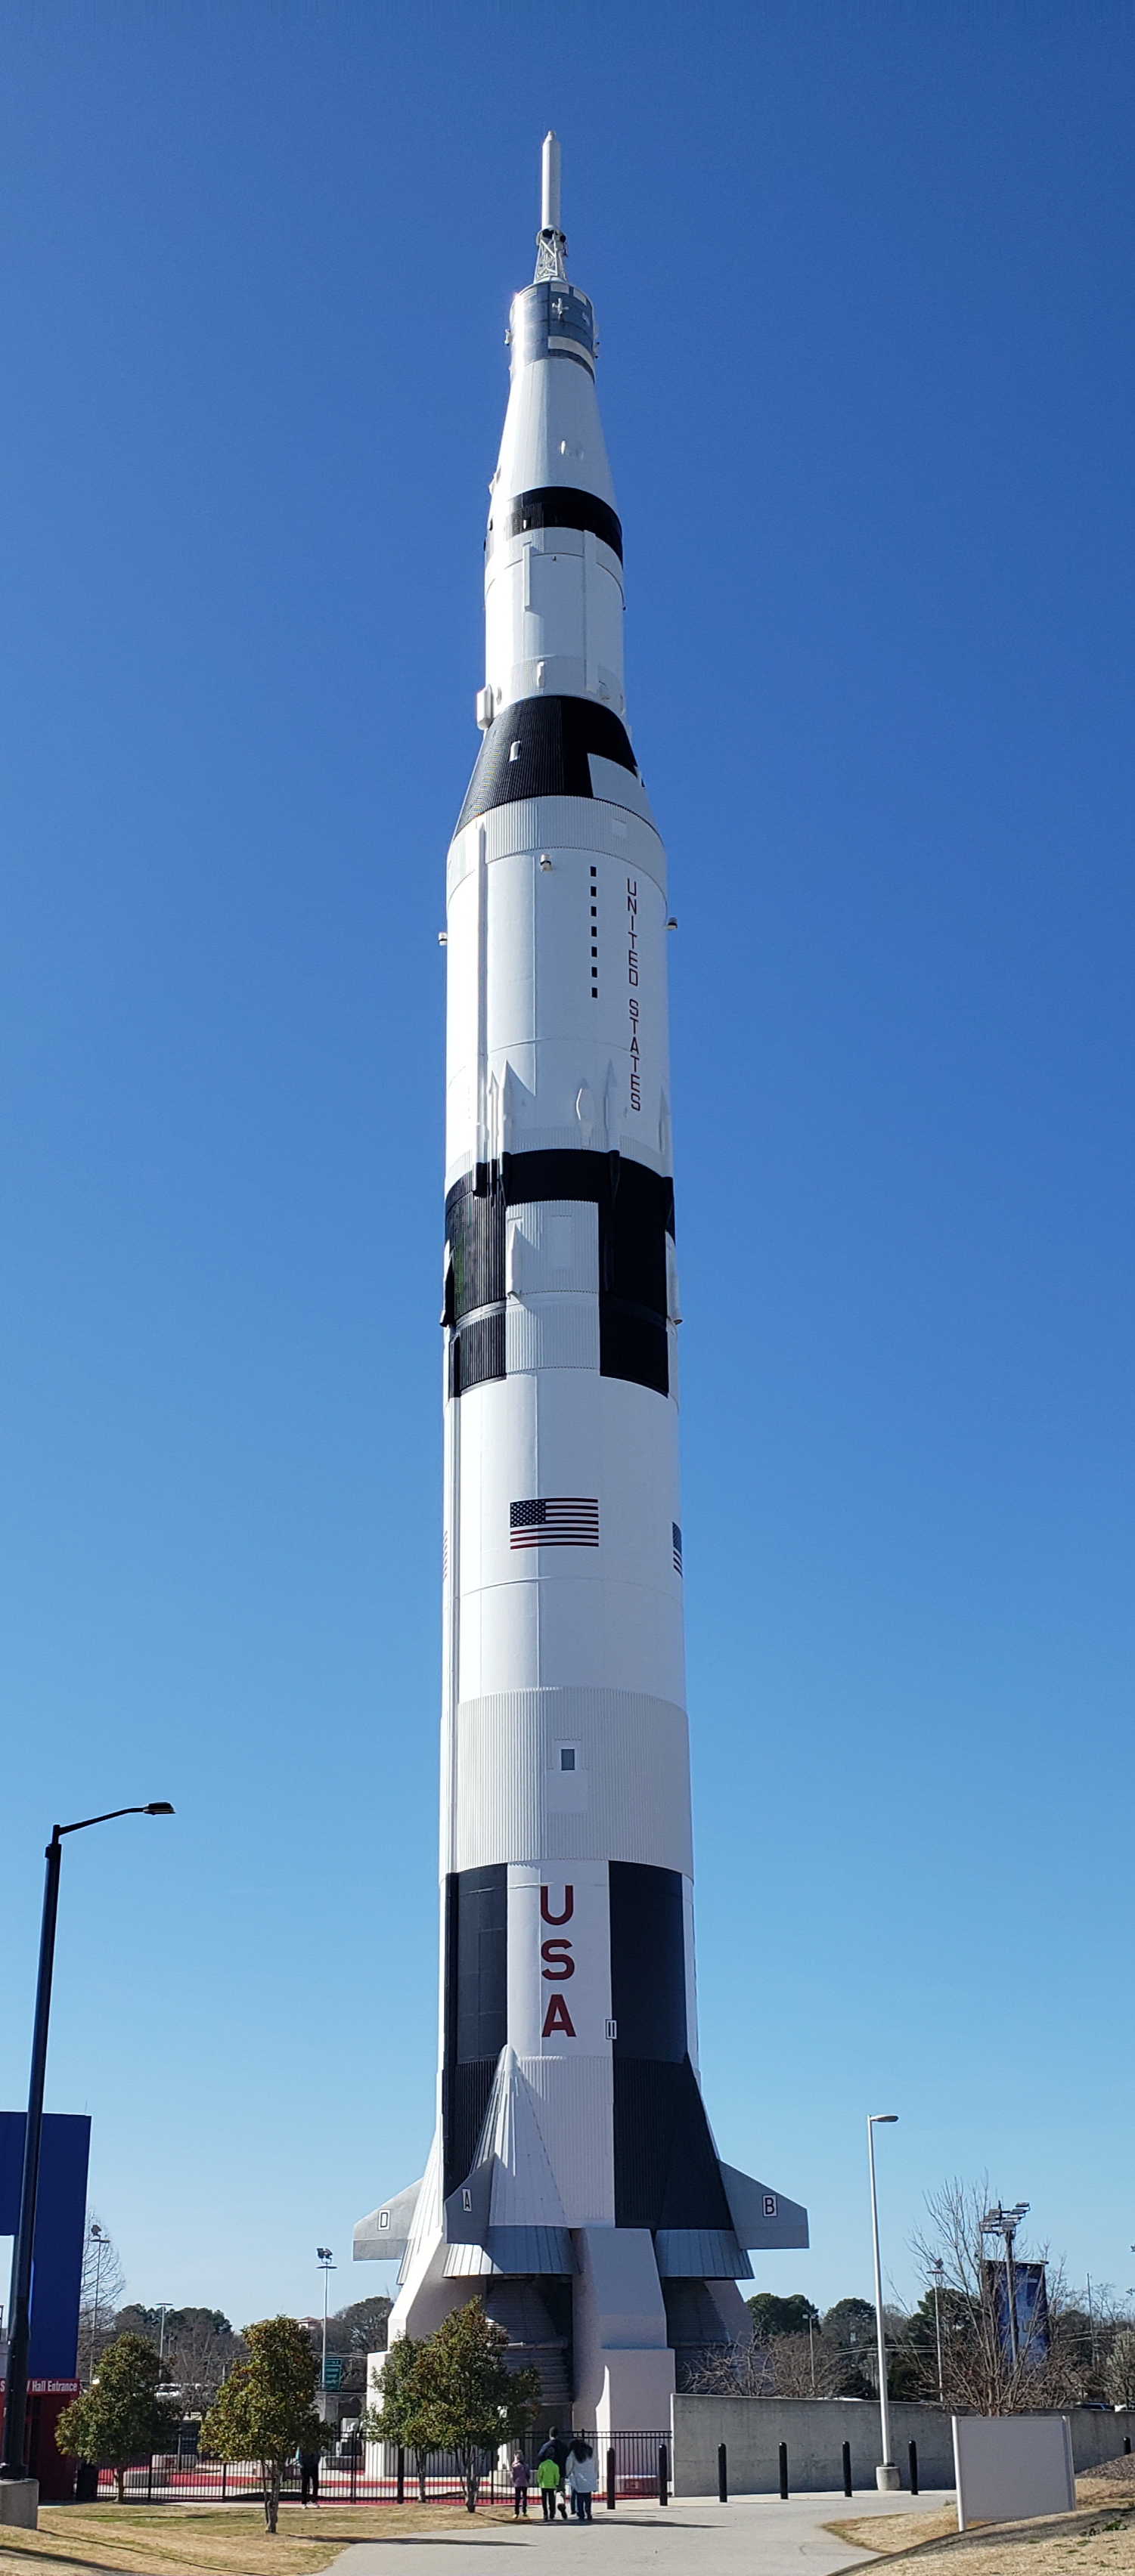 Full scale replica of the Saturn V rocket at the U.S. Space and Rocket Center. Image credit: A.R. Williams